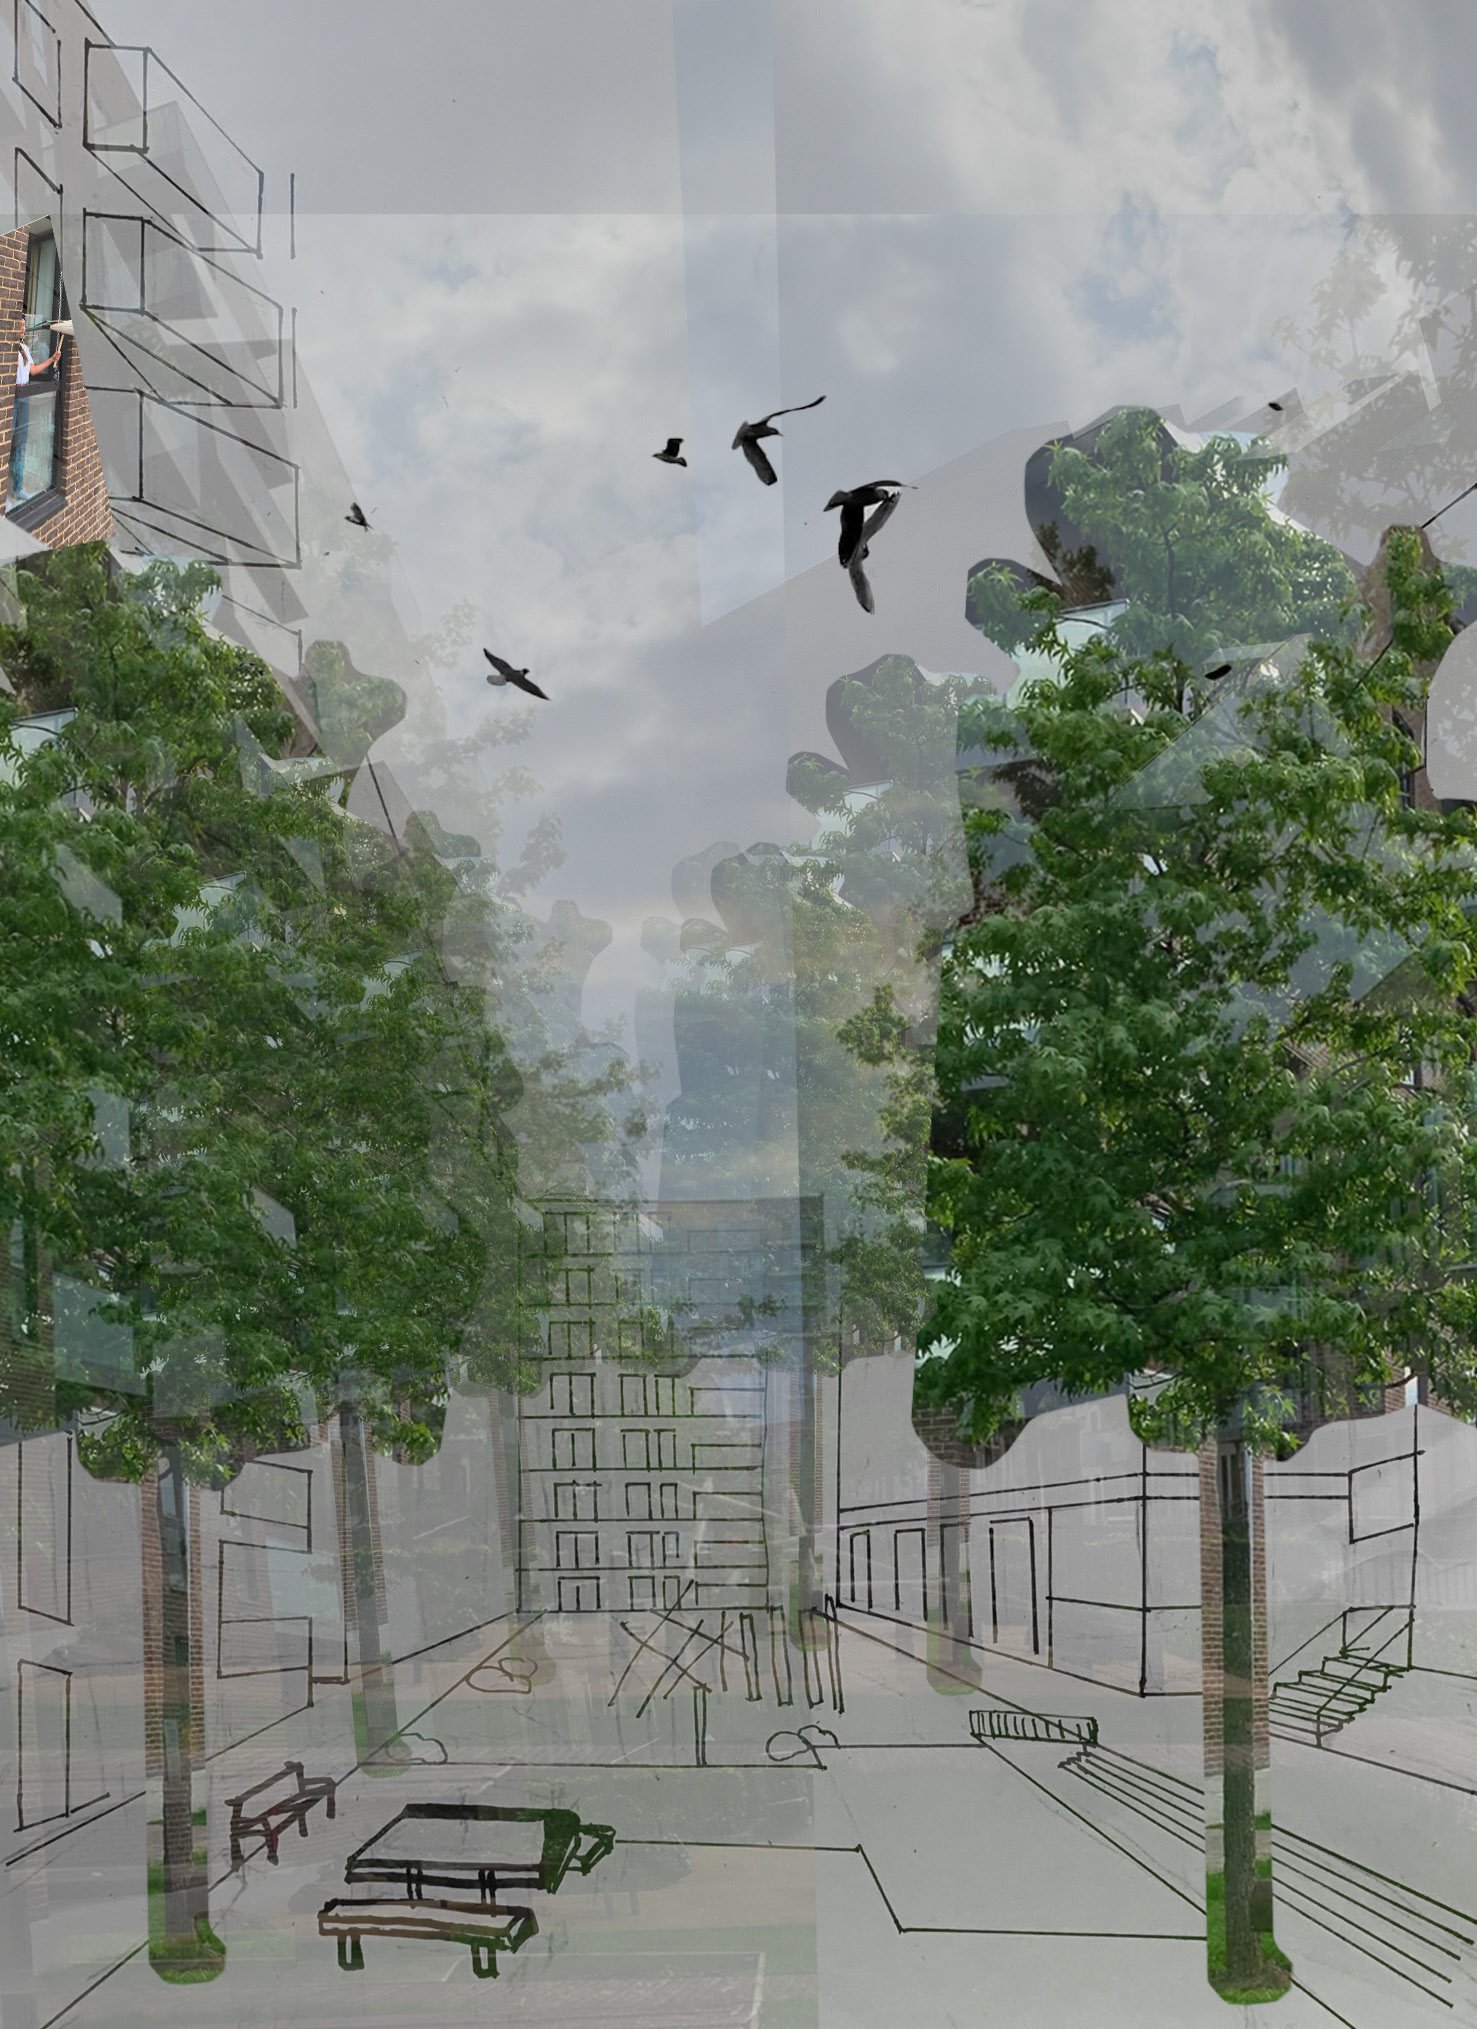 A composite digital image of a space between estate buildings shown in perspective. Birds are seen flying above